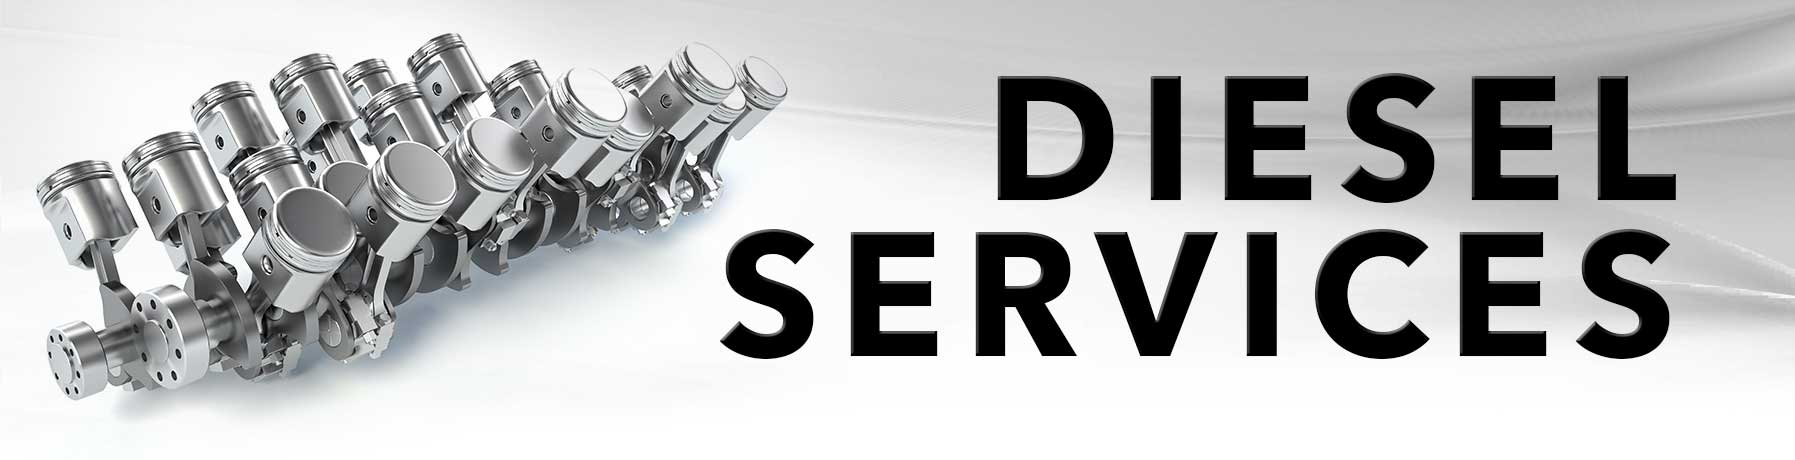 Diesel Service banner image with picture of diesel engine